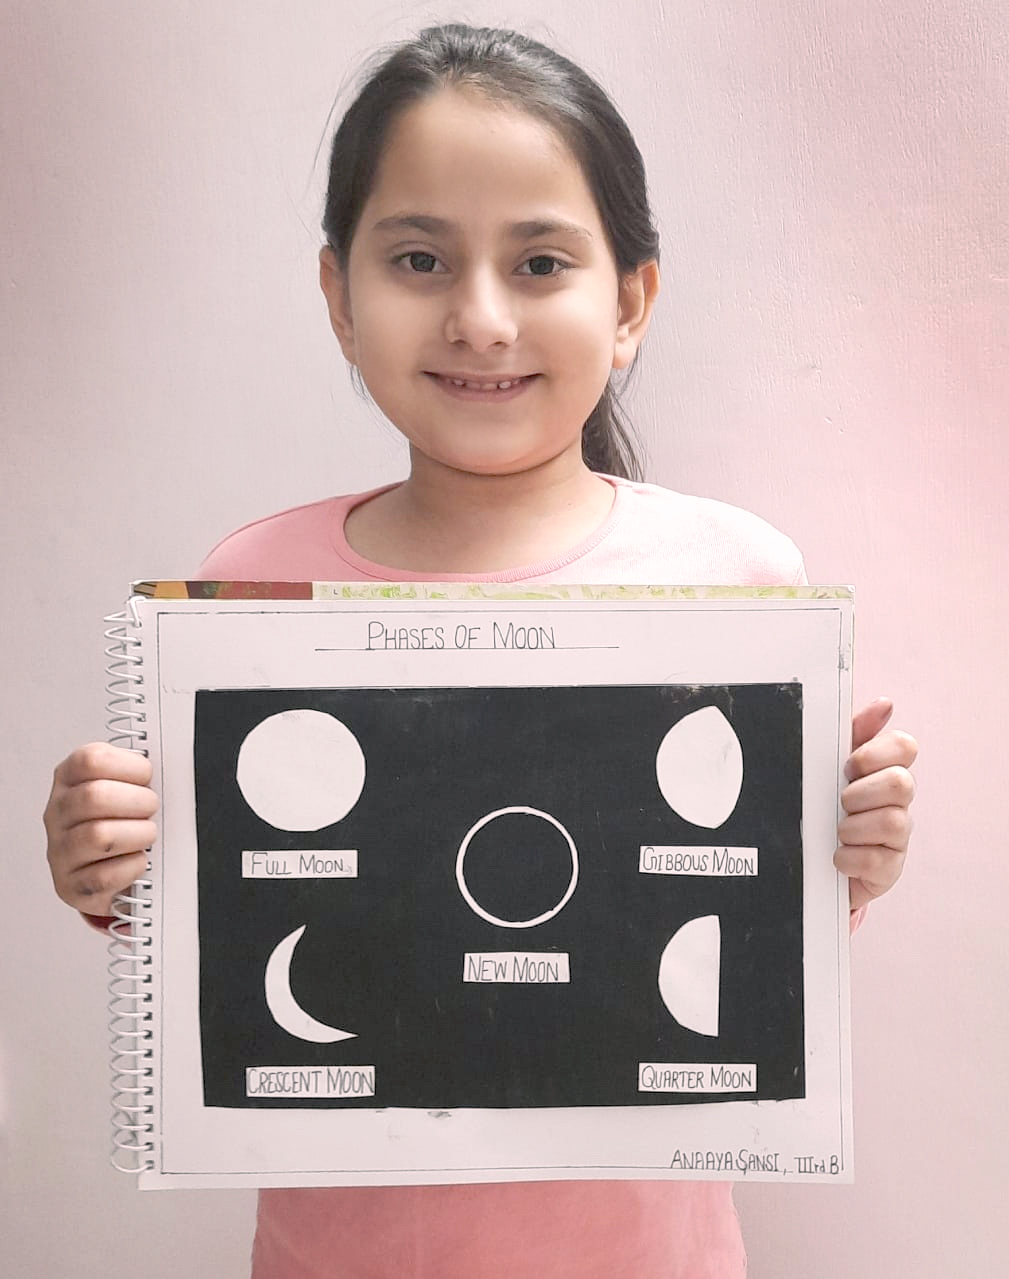 Presidium Punjabi Bagh, STUDENTS LEARN ABOUT THE DIFFERENT PHASES OF MOON